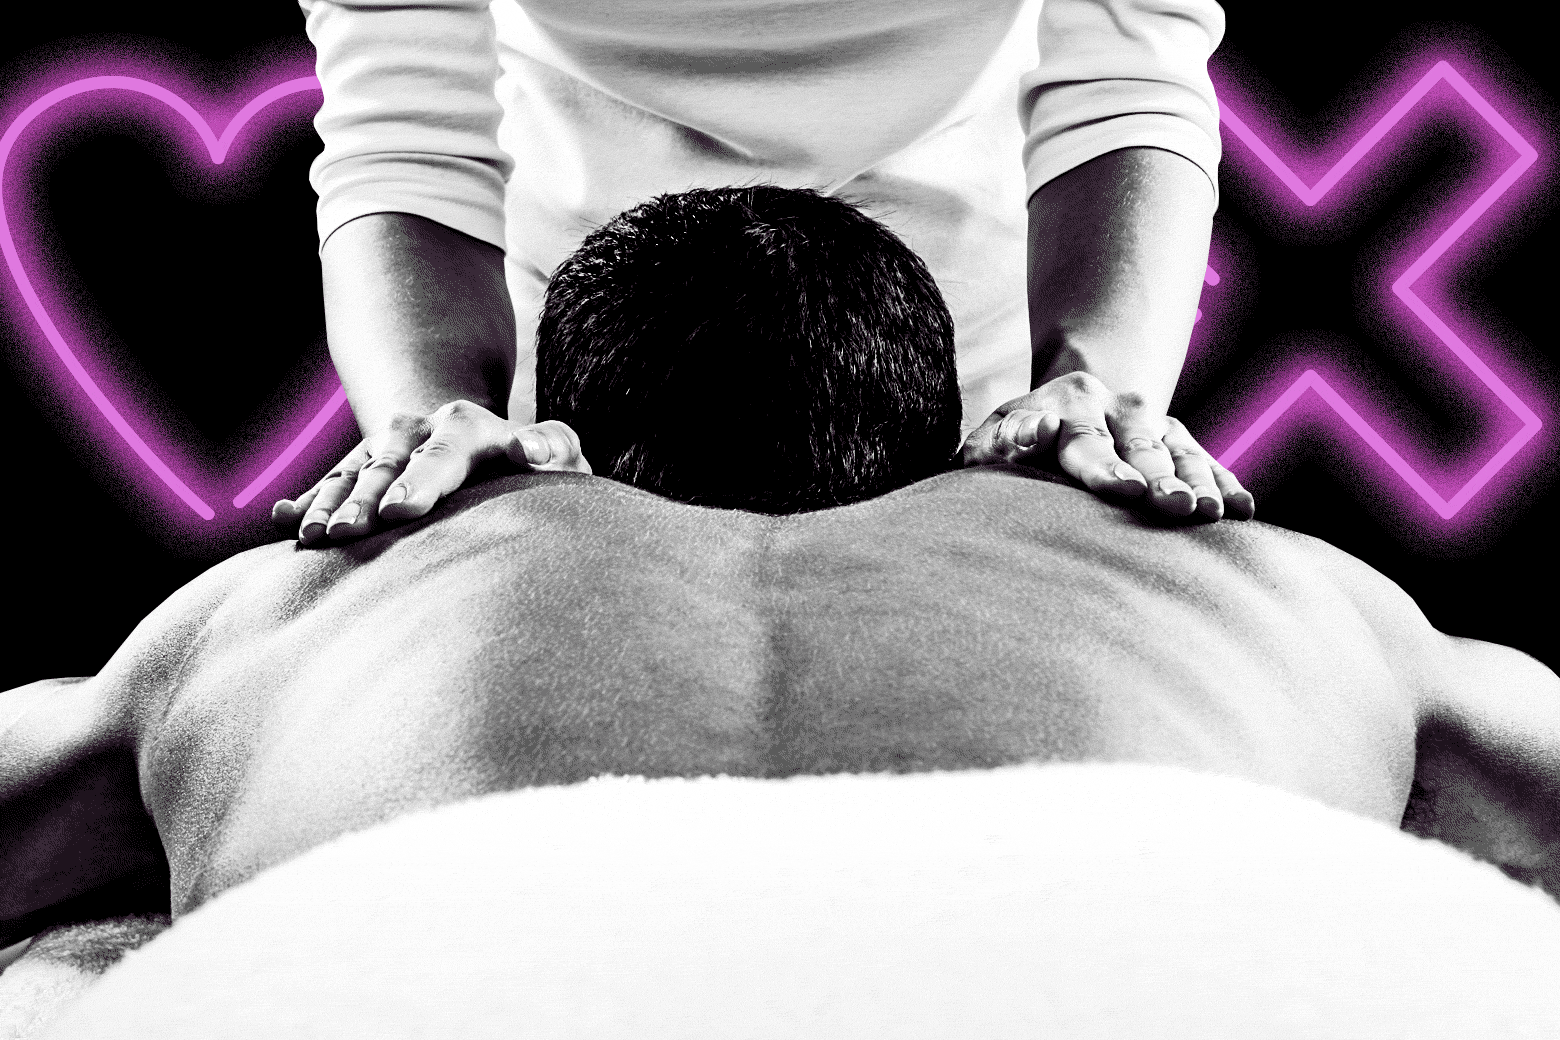 My wife shut down our sex life—is it wrong I go to massage parlors instead? image